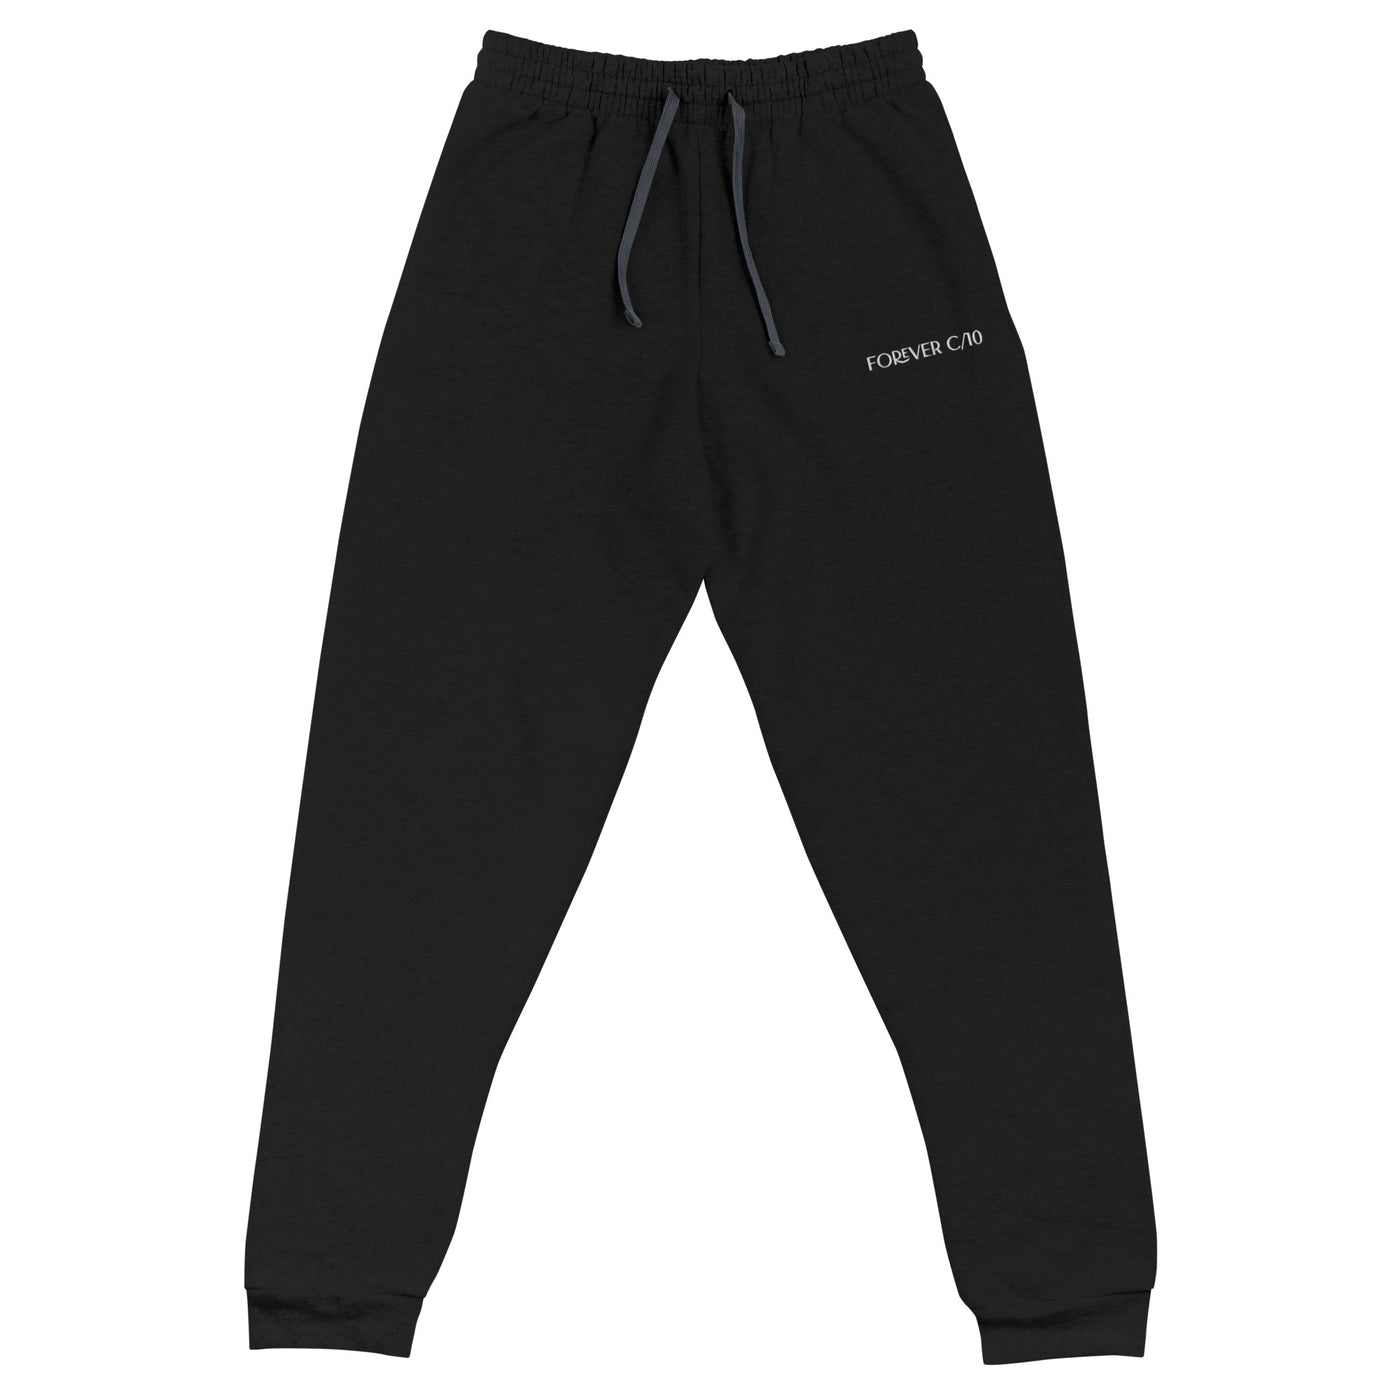 Versatile Unisex Joggers, Stylish Gender-Neutral Sweatpants, Comfortable Jogging Pants for Everyone, Fashionable Unisex Track Pants, Trendy All-Gender Joggers, Modern Unisex Athletic Bottoms, Chic Jogger Pants for Anybody, Quality Gender-Neutral Sweatpants, Urban Unisex Jogging Trousers, Athletic Unisex Joggers, Casual Unisex Jogging Pants, Fashion-Forward Gender-Neutral Joggers, Durable Jogger Pants for All, Cozy Unisex Lounge Pants